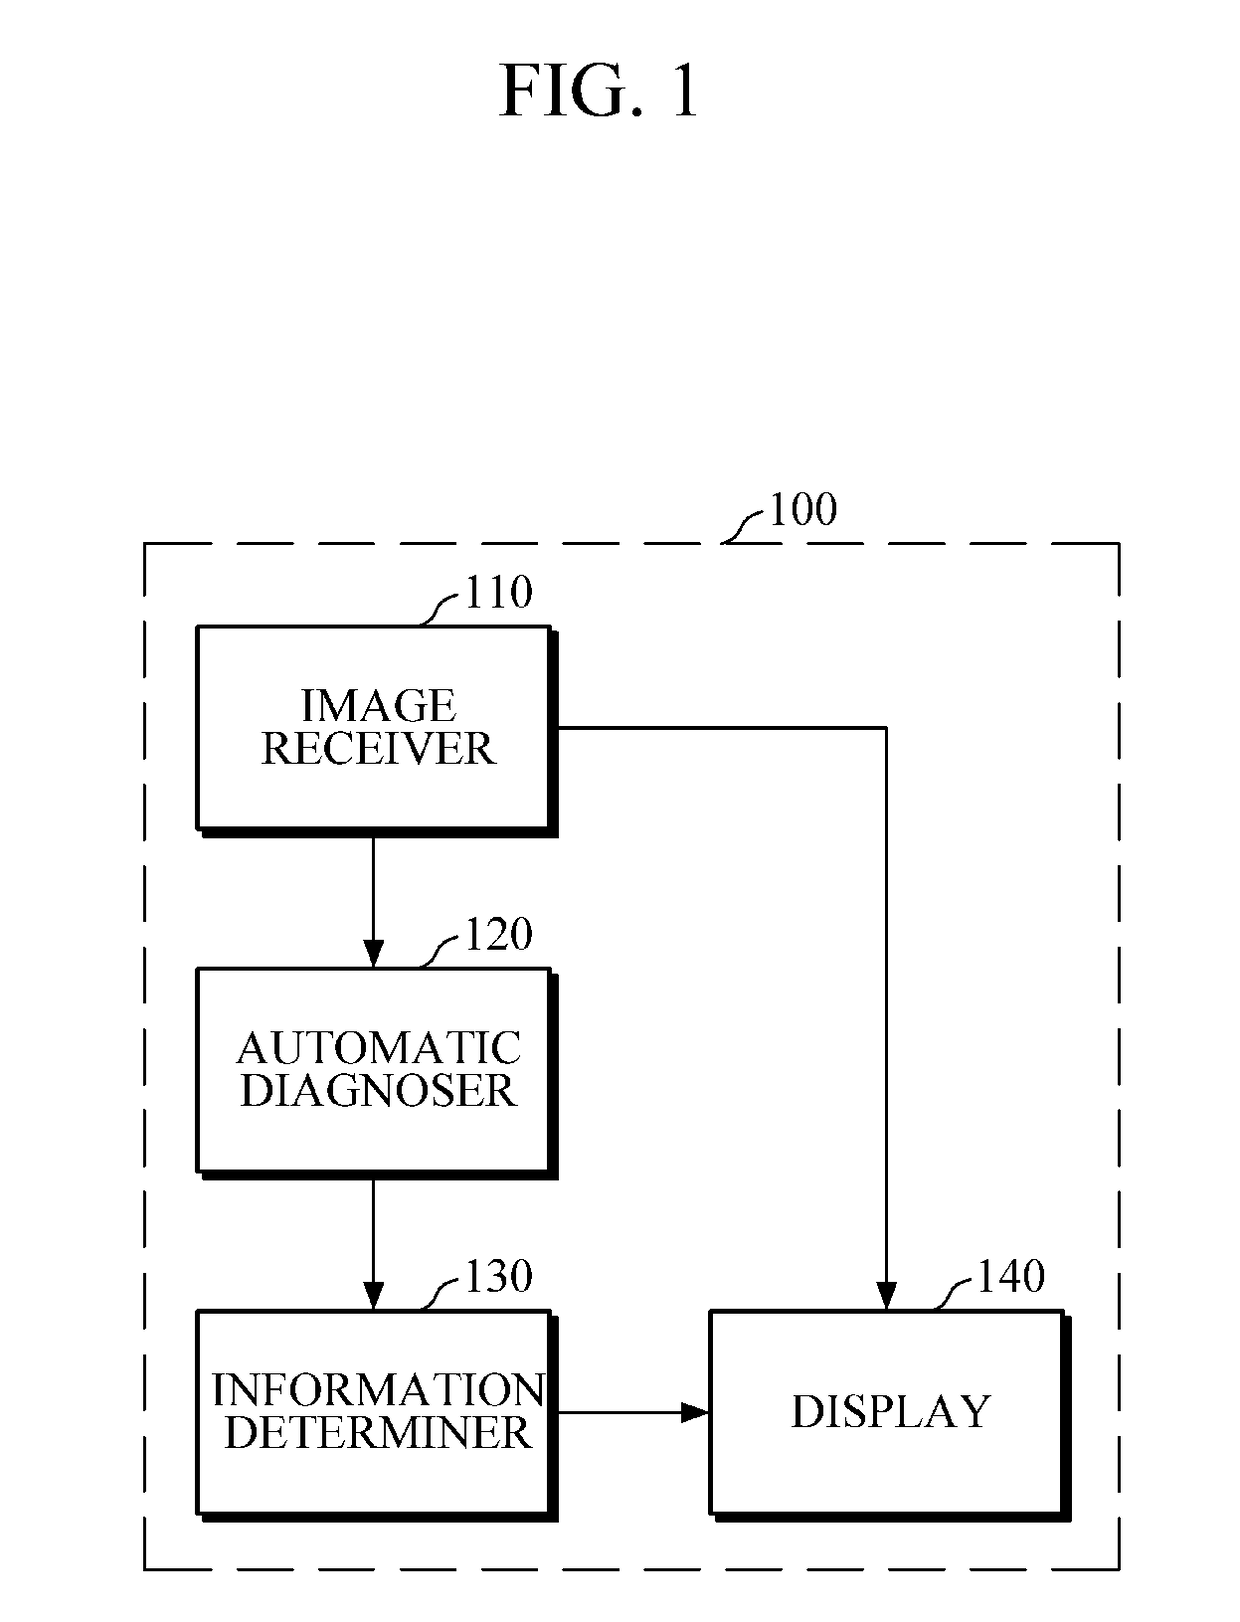 Computer-aided diagnosis apparatus and computer-aided diagnosis method